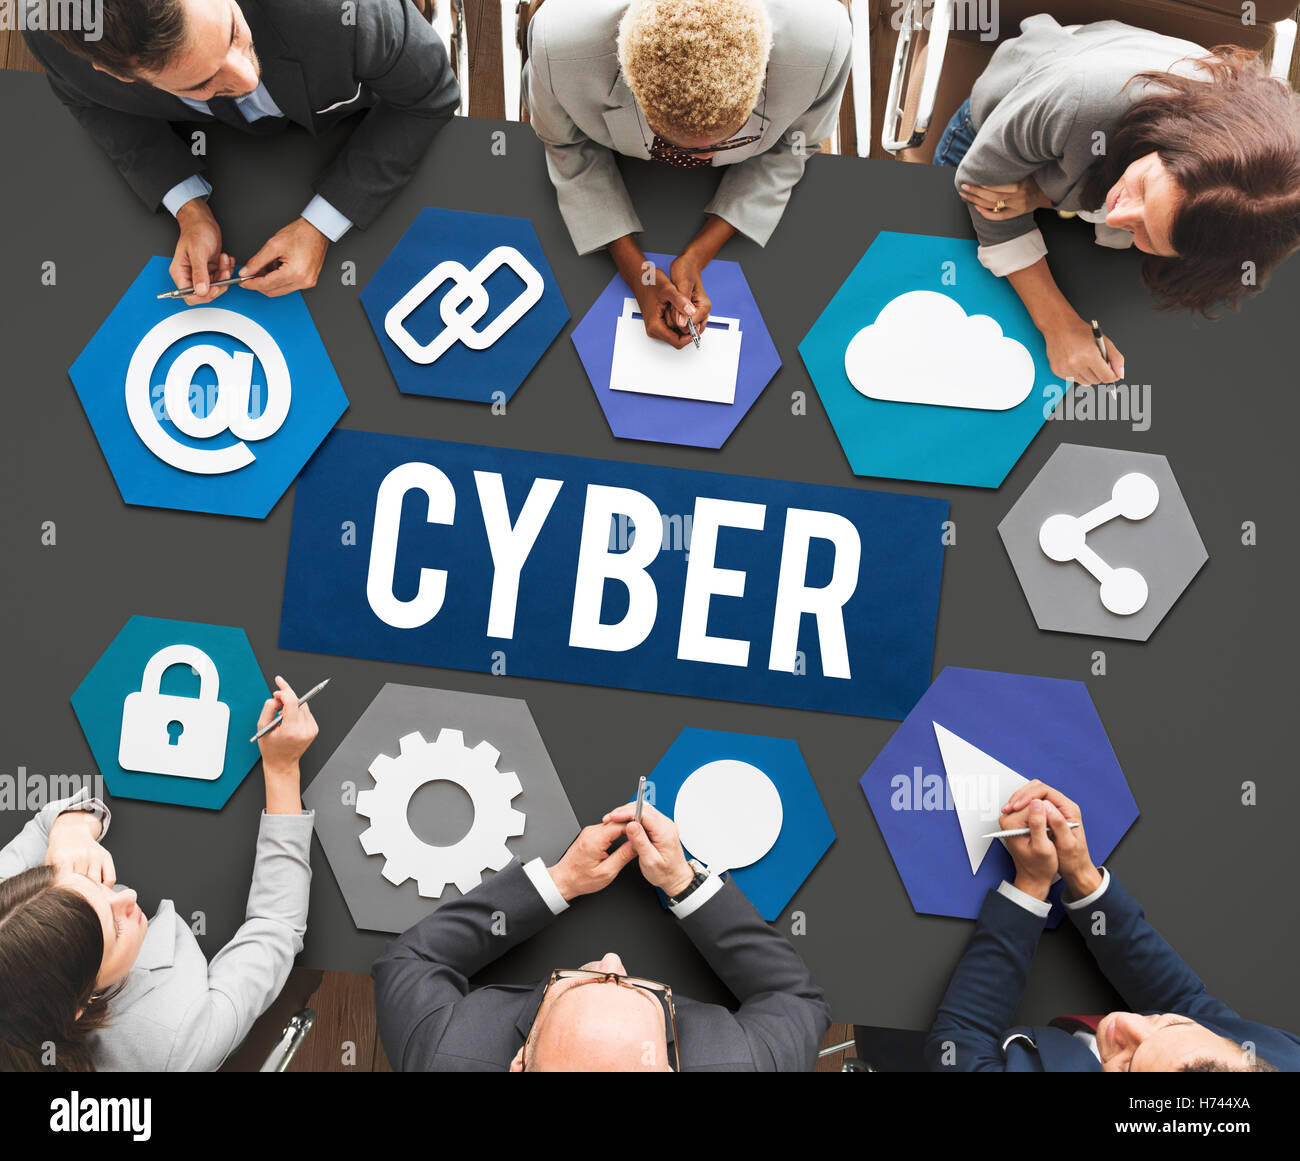 Cyber Online Technology Internet Concept Stock Photo